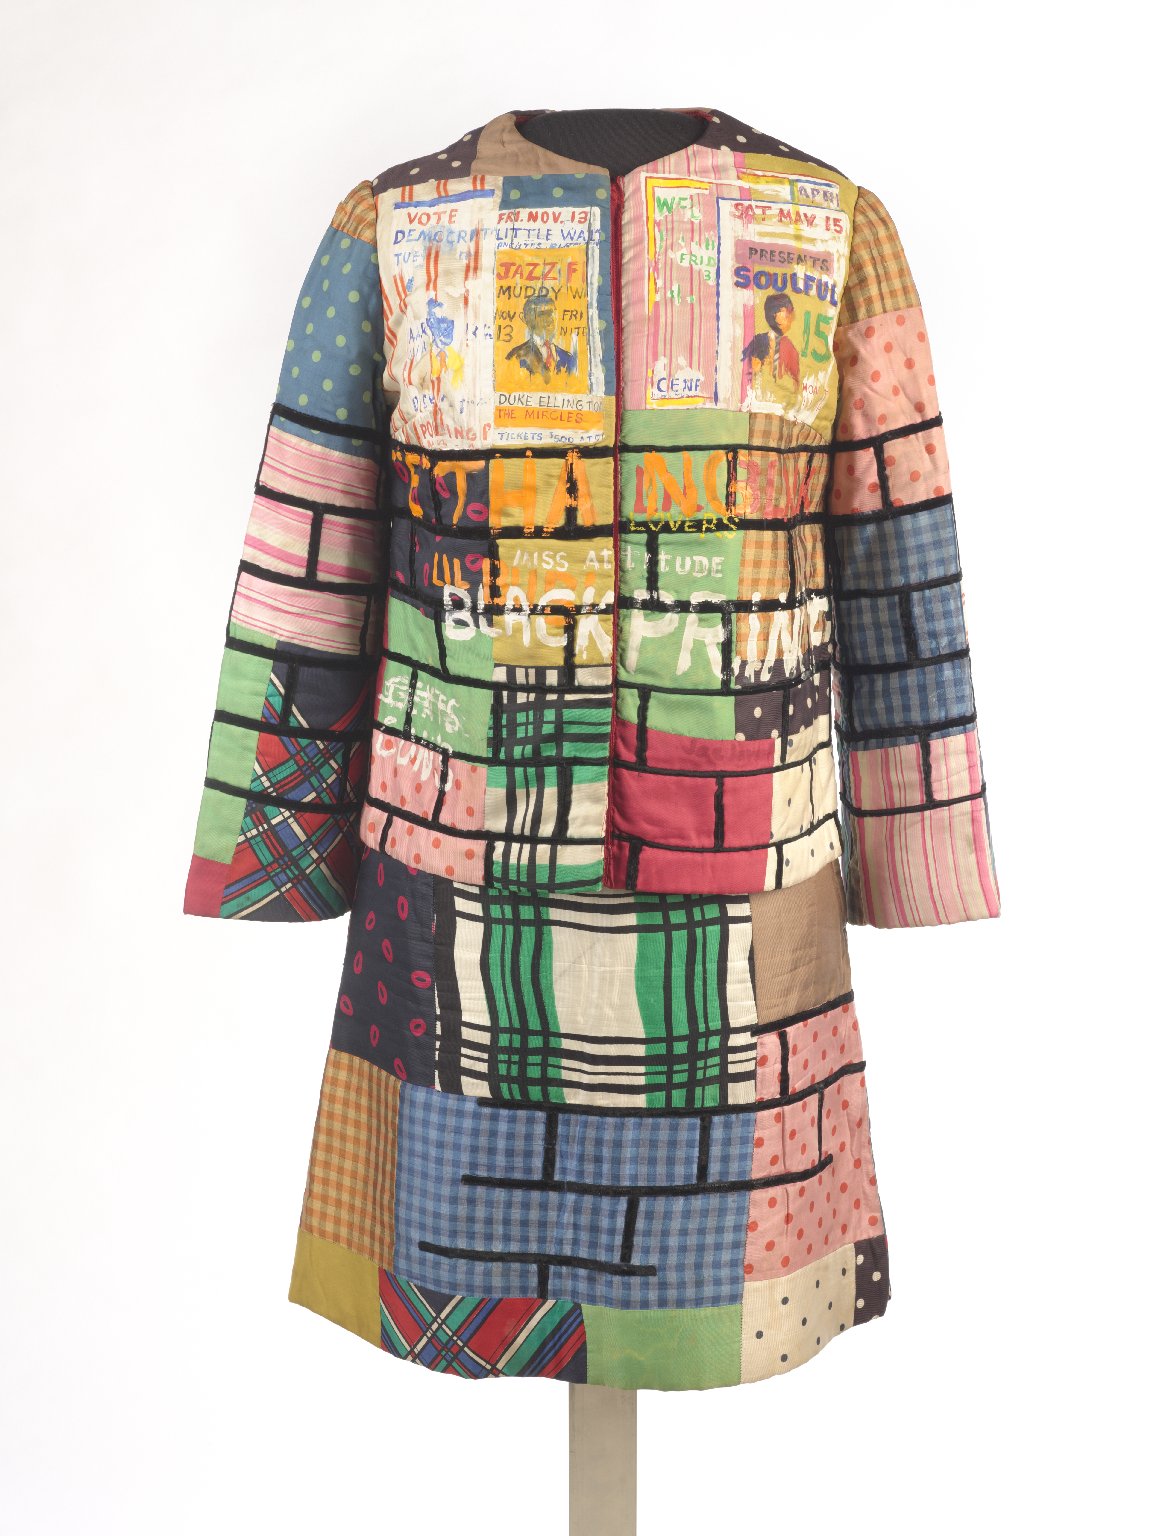 Jae Jarrell, Urban Wall Suit, ca. 1969. Brooklyn Museum, Gift of R.M. Atwater, Anna Wolfrom Dove, Alice Fiebiger, Joseph Fiebiger, Belle Campbell Harriss, and Emma L. Hyde, by exchange, Designated Purchase Fund, Mary Smith Dorward Fund, Dick S. Ramsay Fund, and Carll H. de Silver Fund © the artist. Photo: Brooklyn Museum